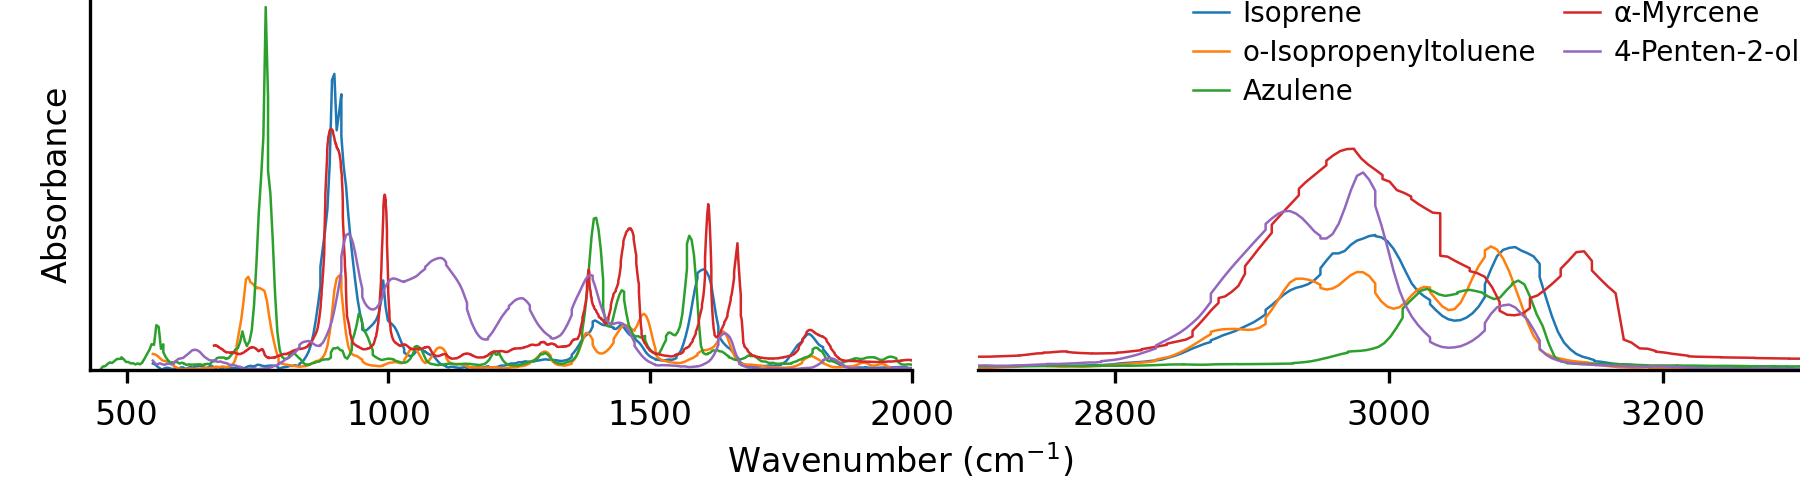 Infrared spectrum of several volatile organic compounds.